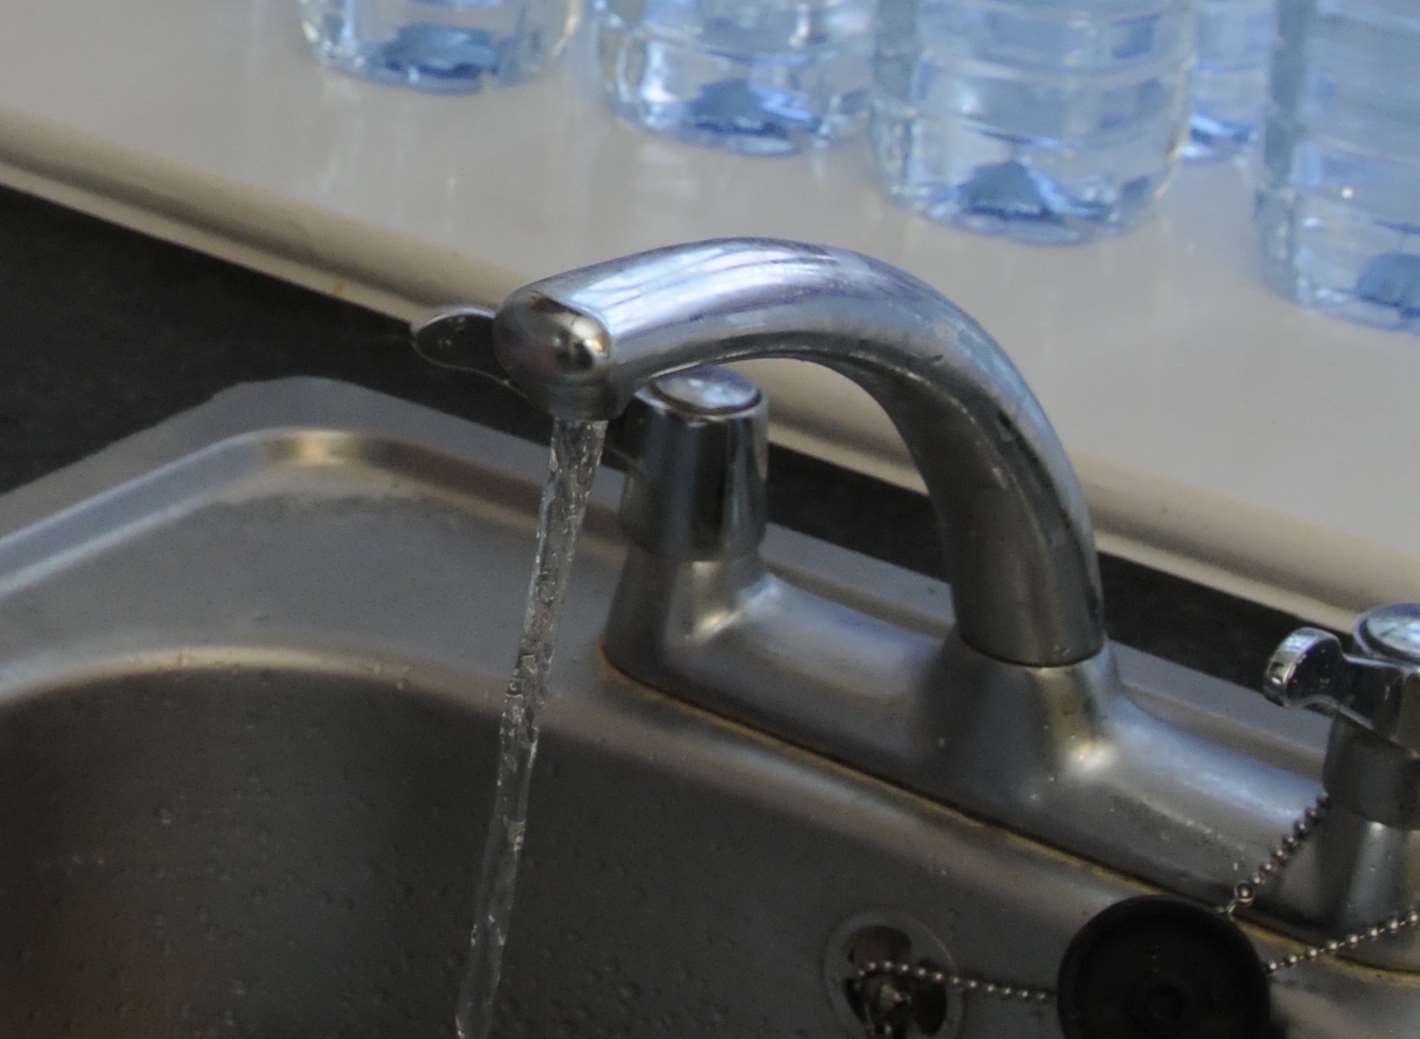 Residents in Queen Street in Deal are without water